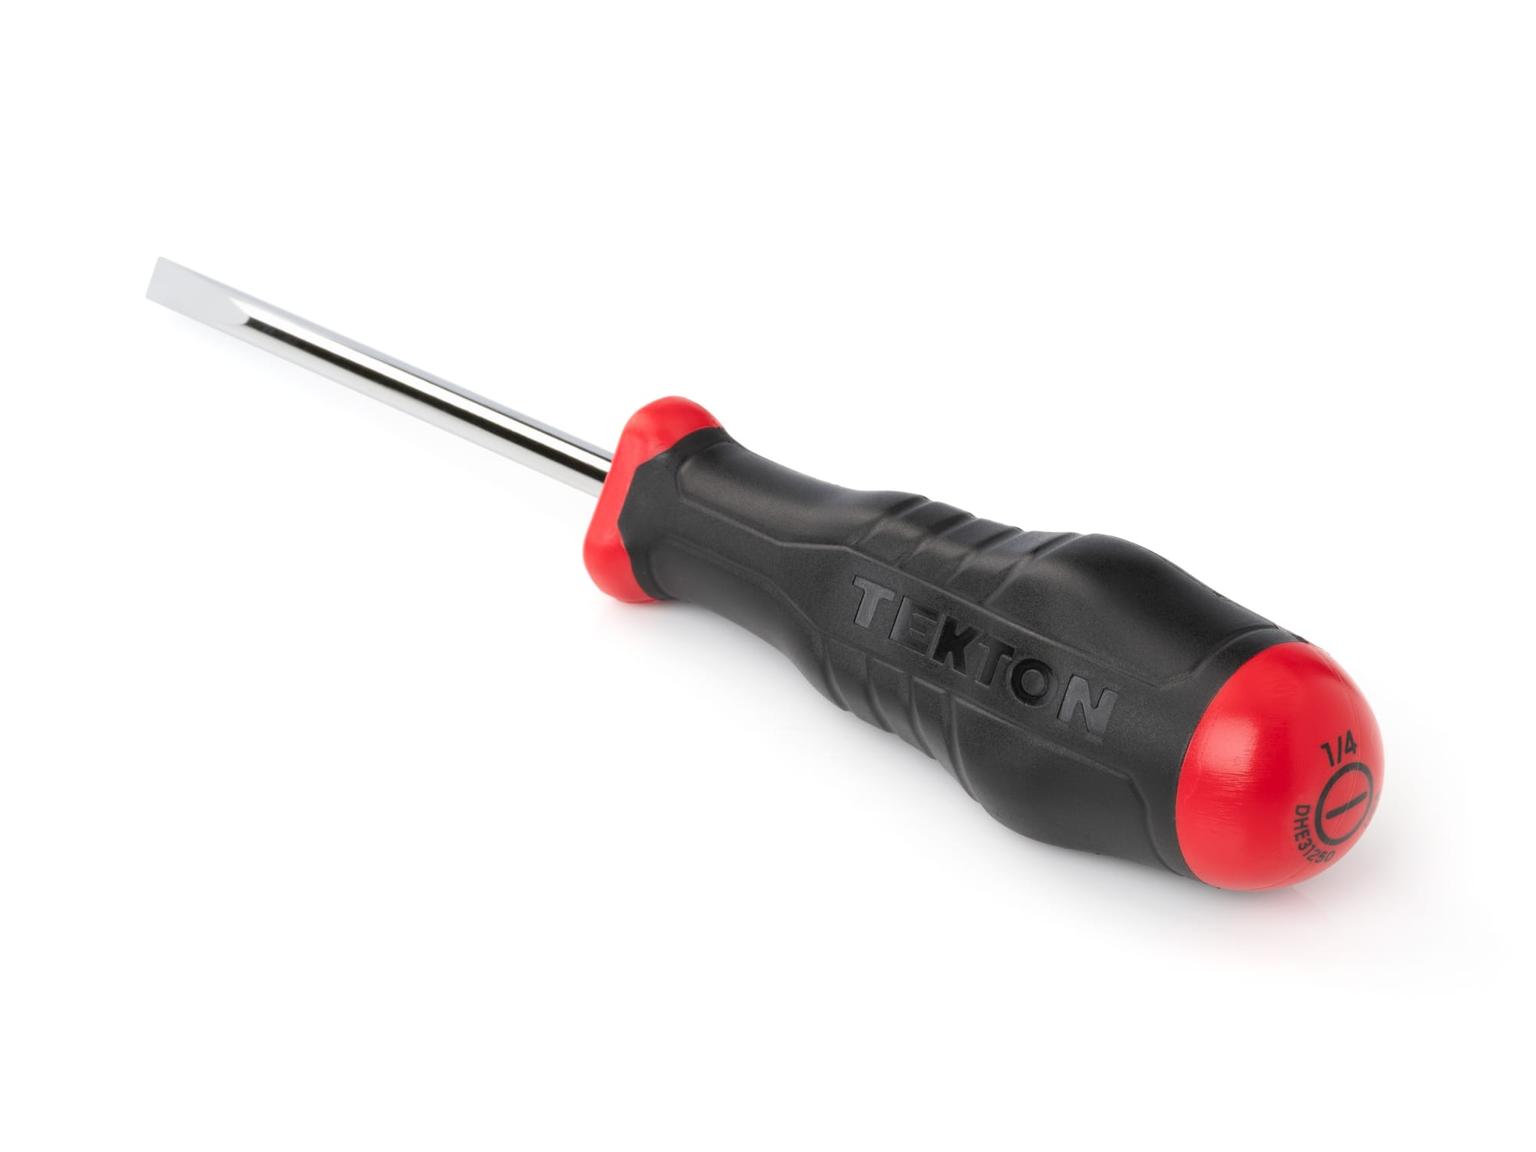 TEKTON DHE31250-T 1/4 Inch Slotted High-Torque Screwdriver